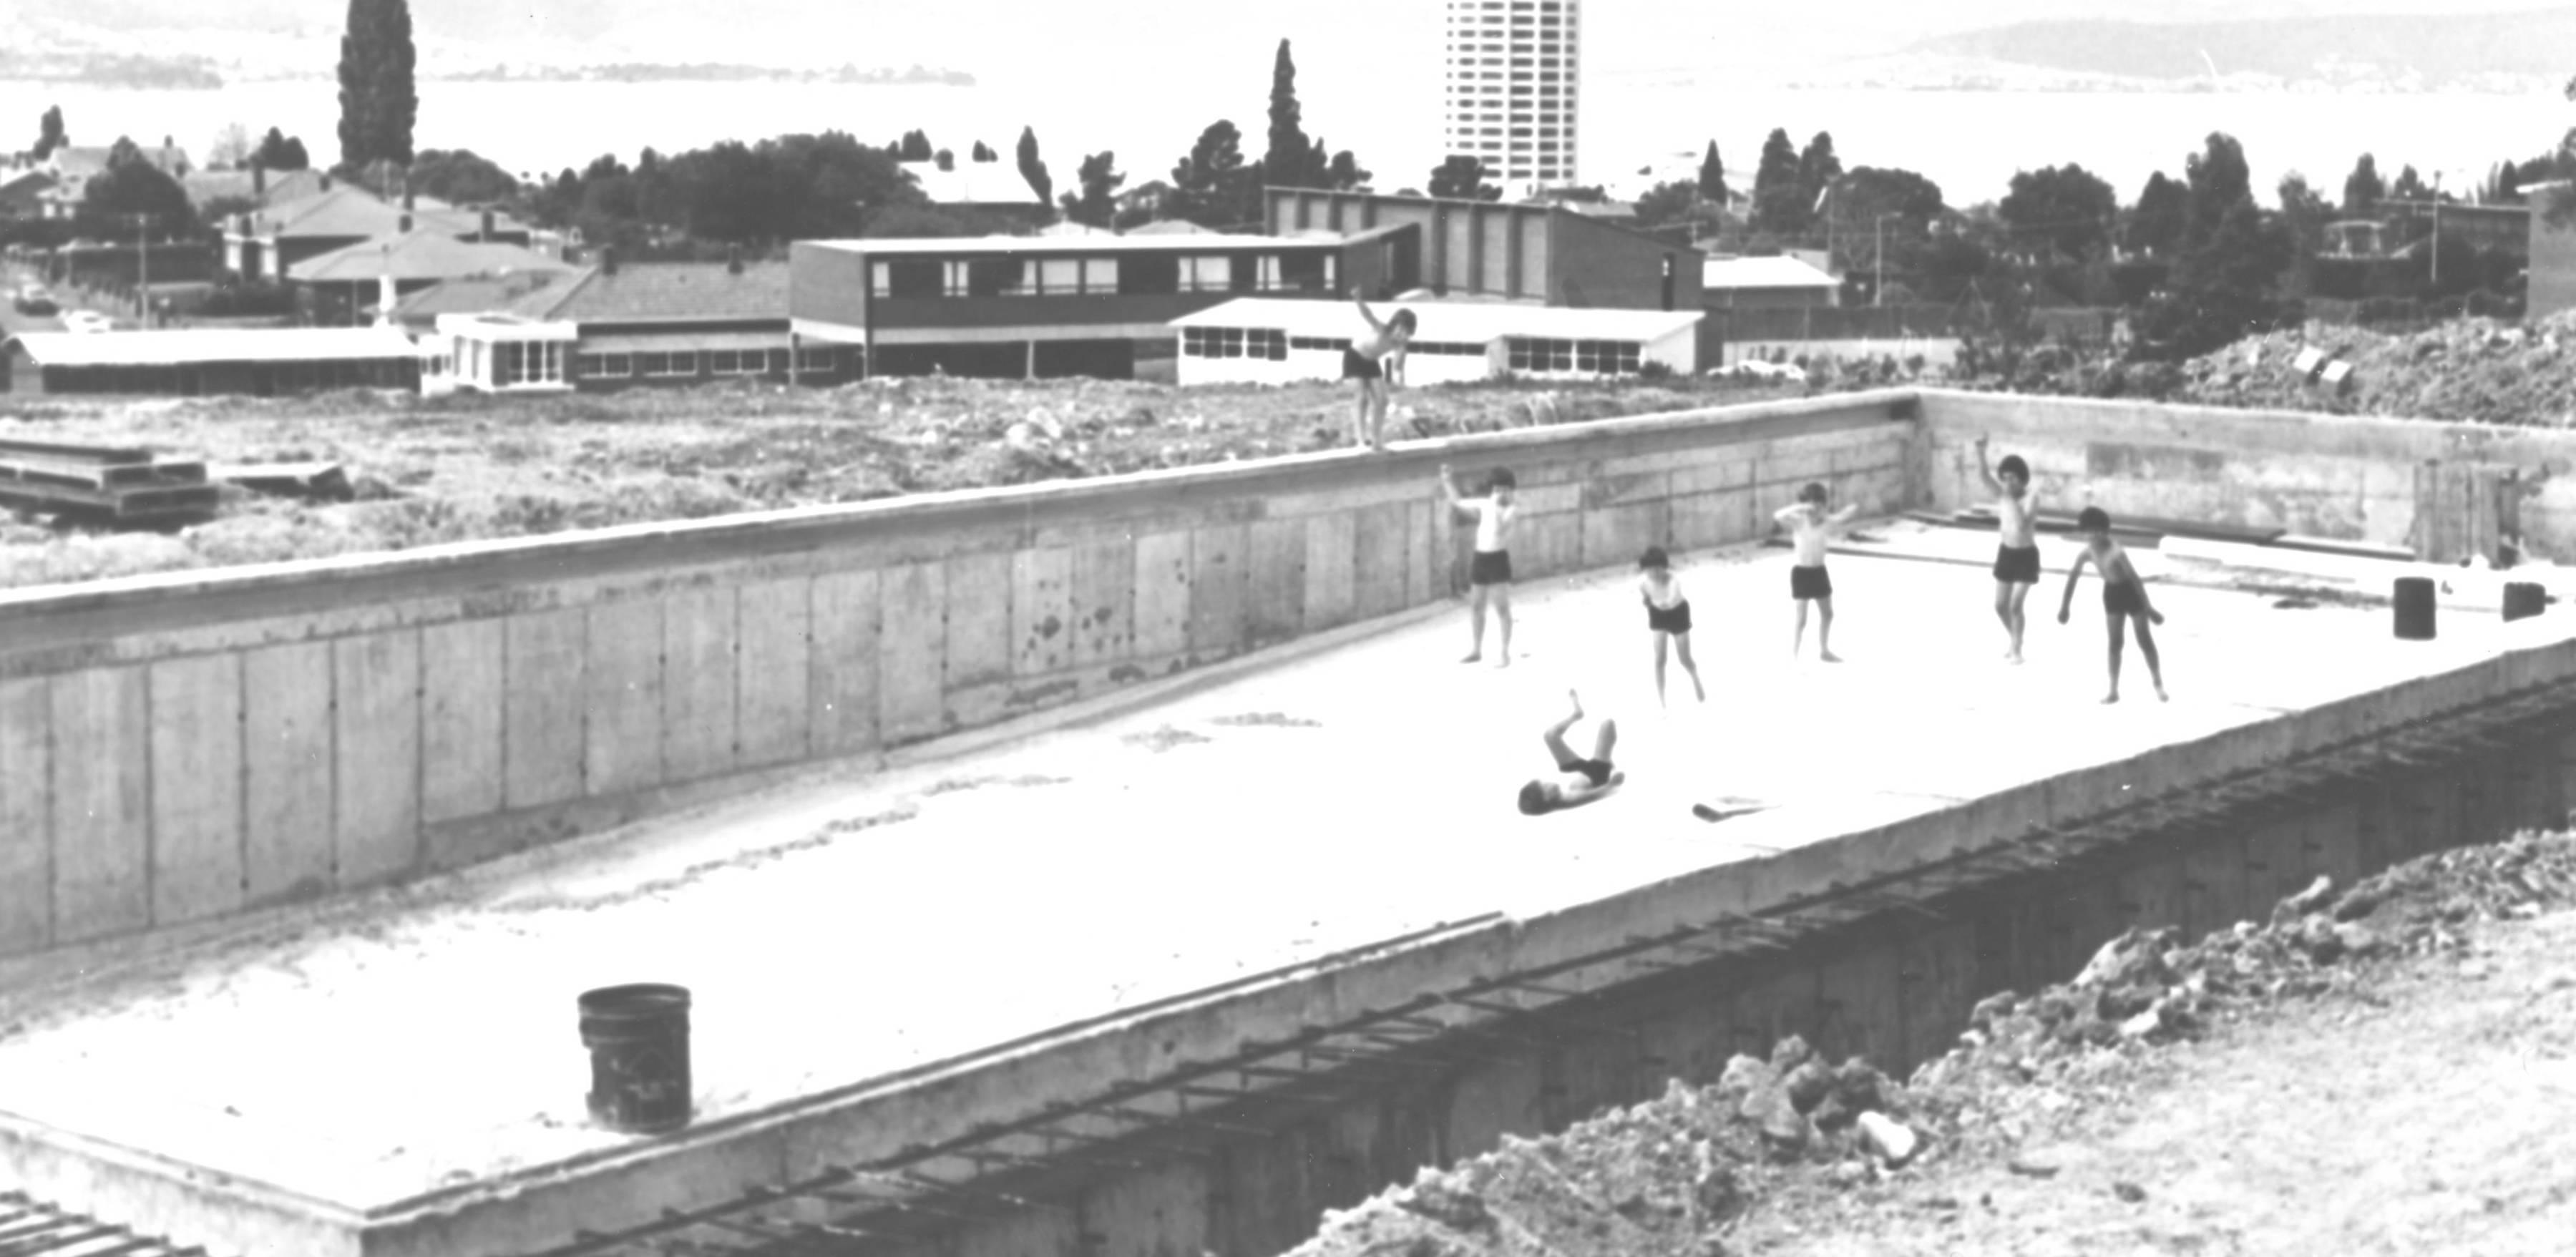 Outdoor swimming pool under construction with ‘swimmers’, 1978.